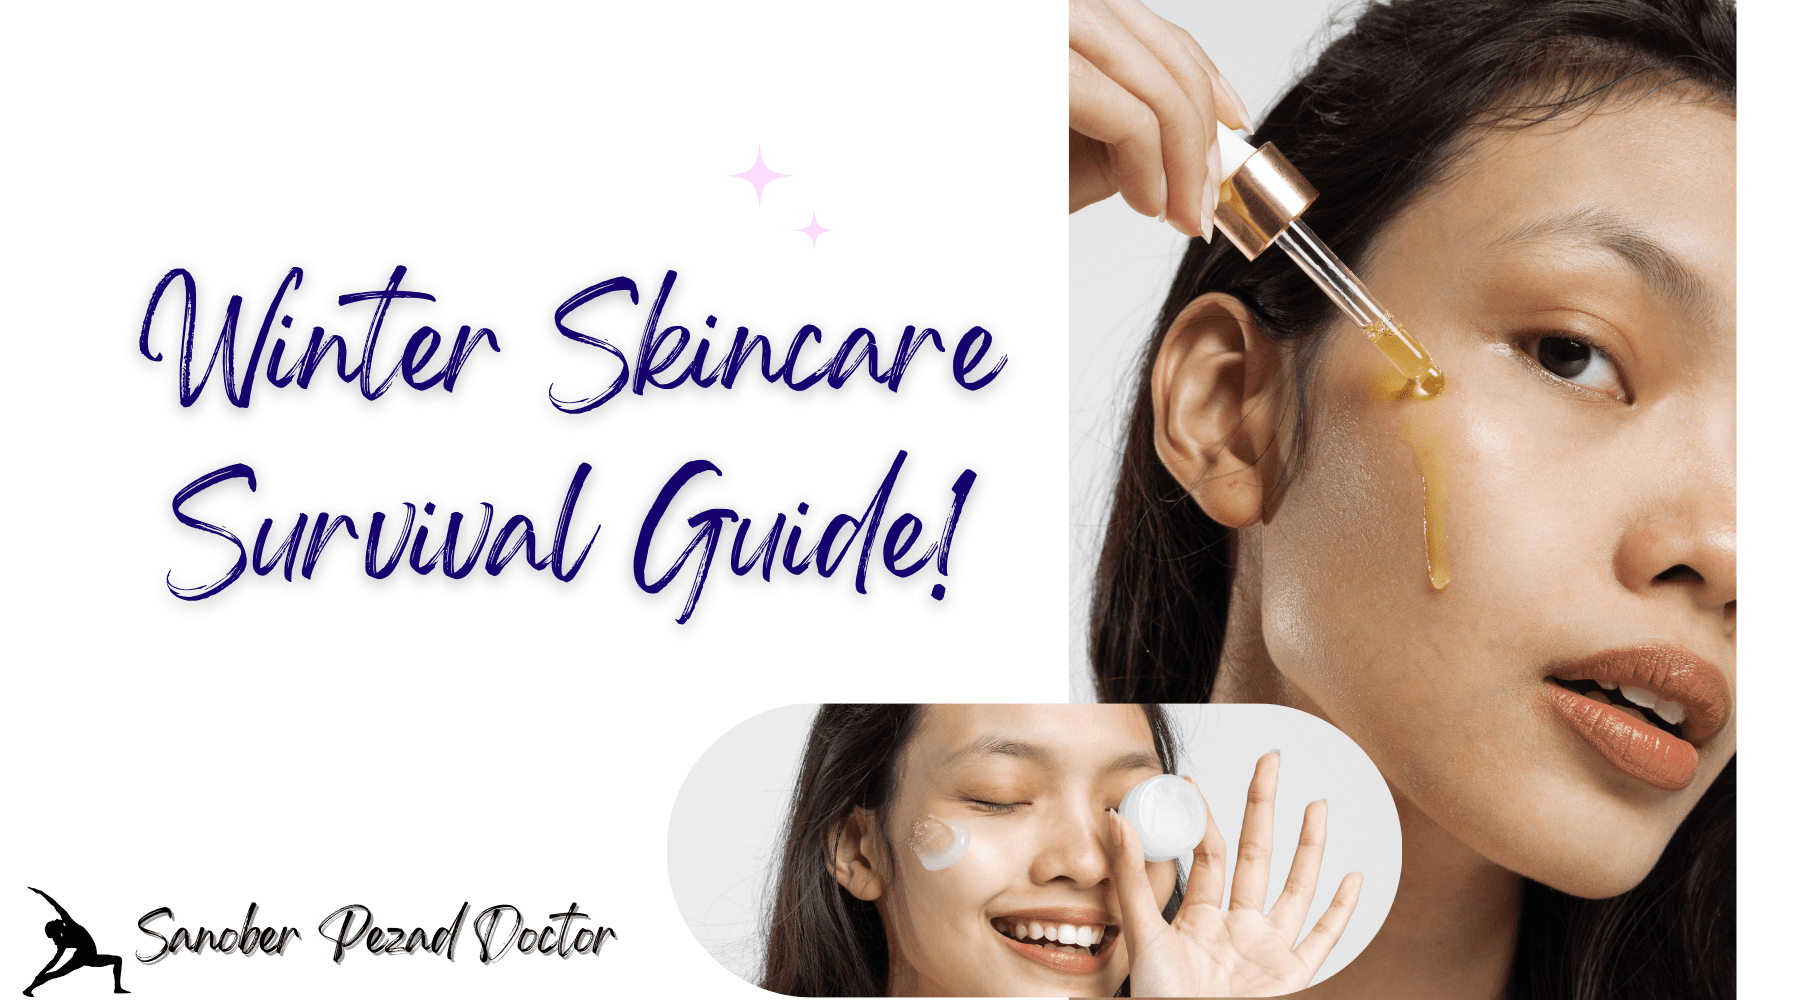 Your Winter Skincare Survival Guide!- Pearls from your Holistic Dermatologist